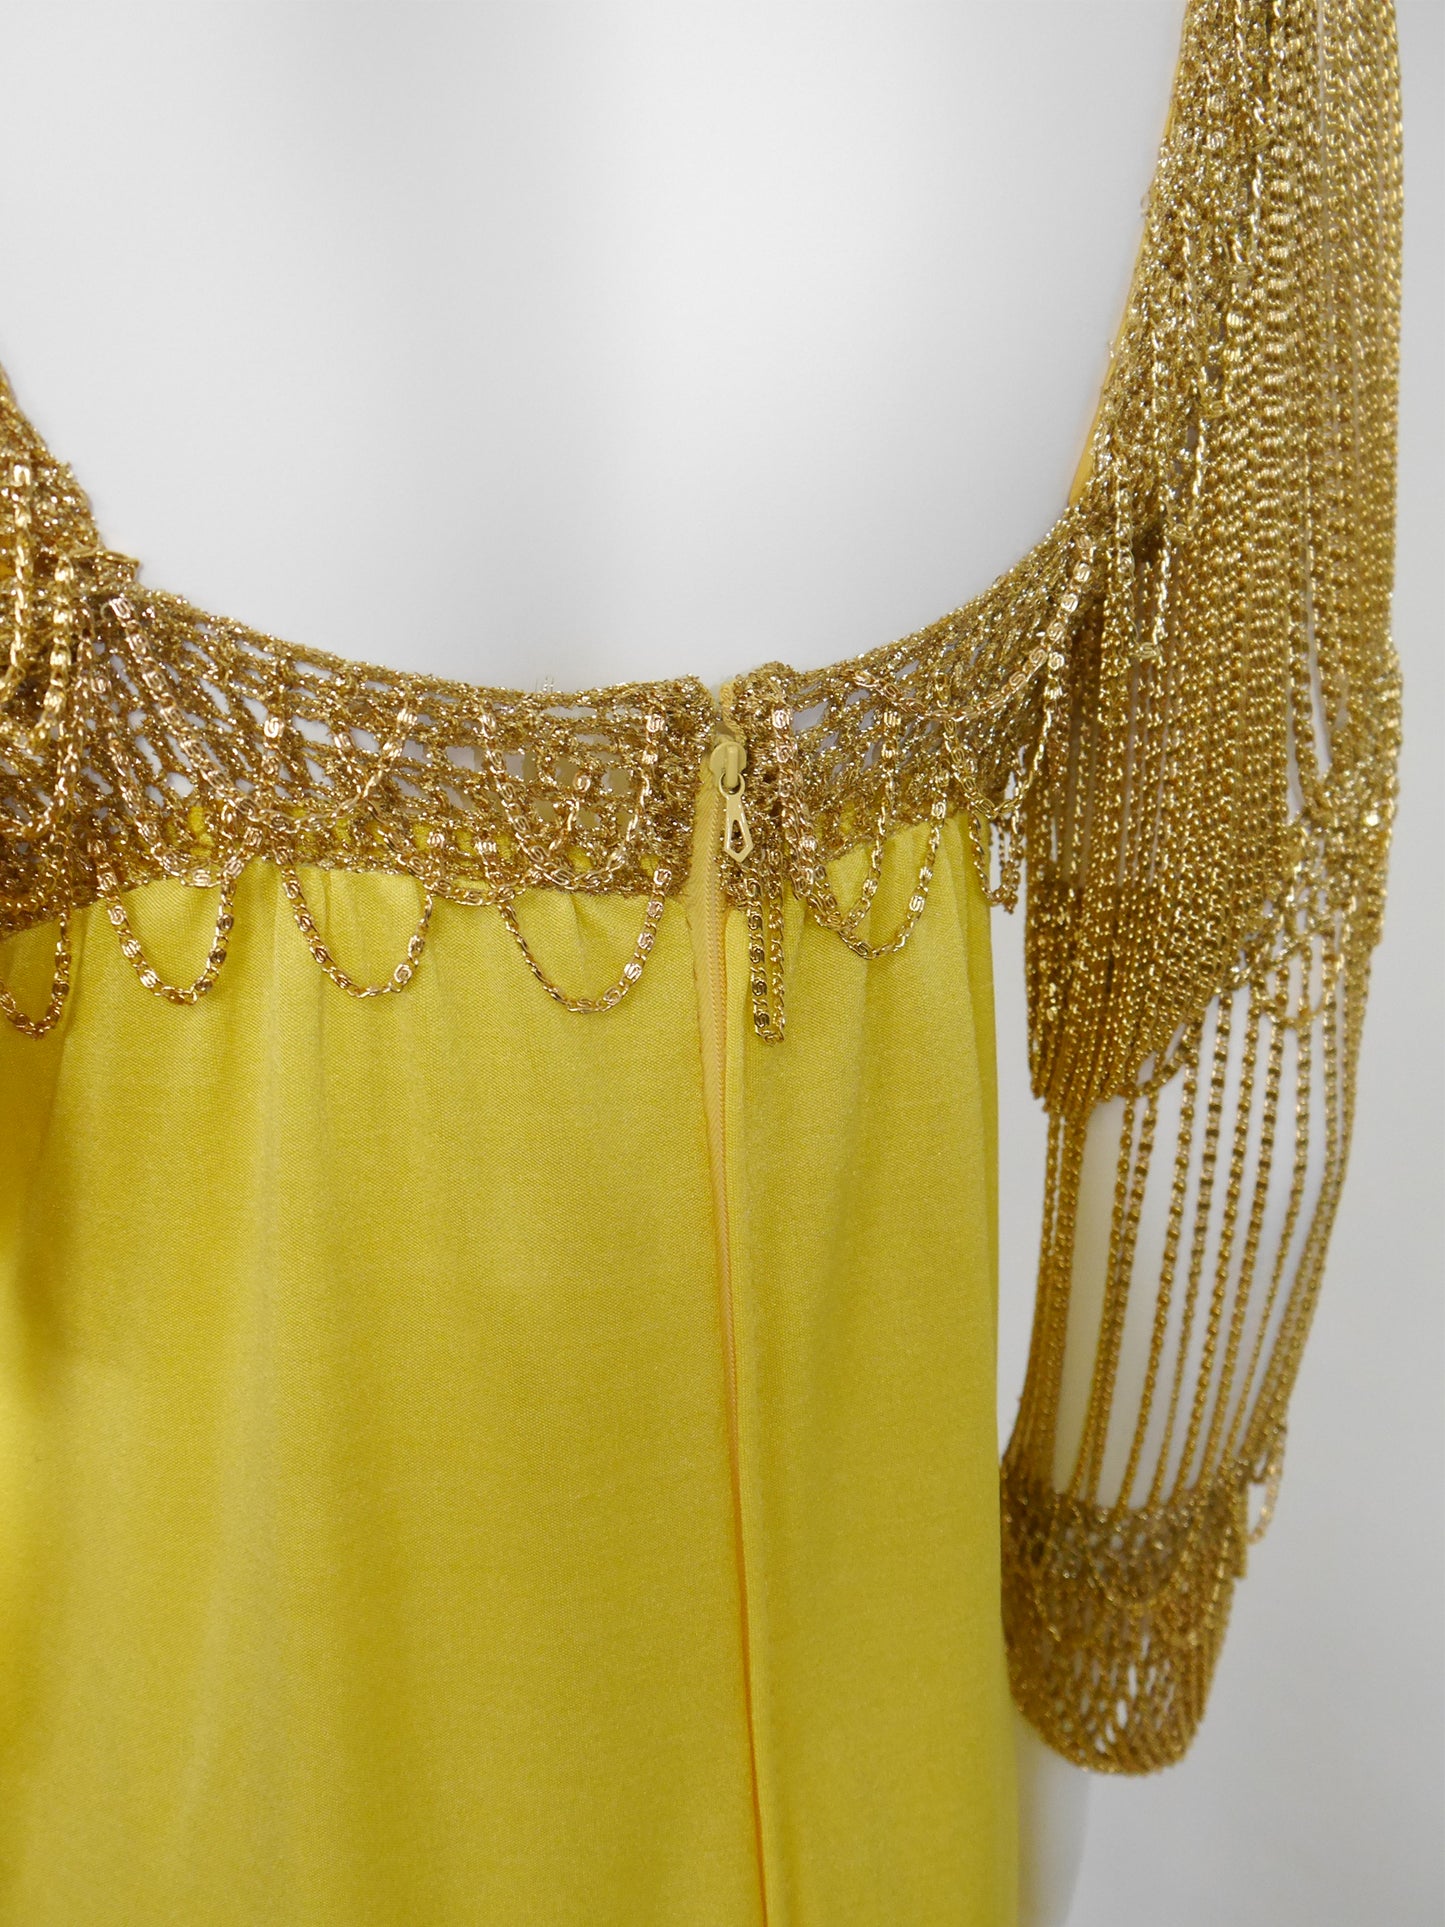 LORIS AZZARO 1970s Vintage Crochet Chainmail Maxi Evening Gown